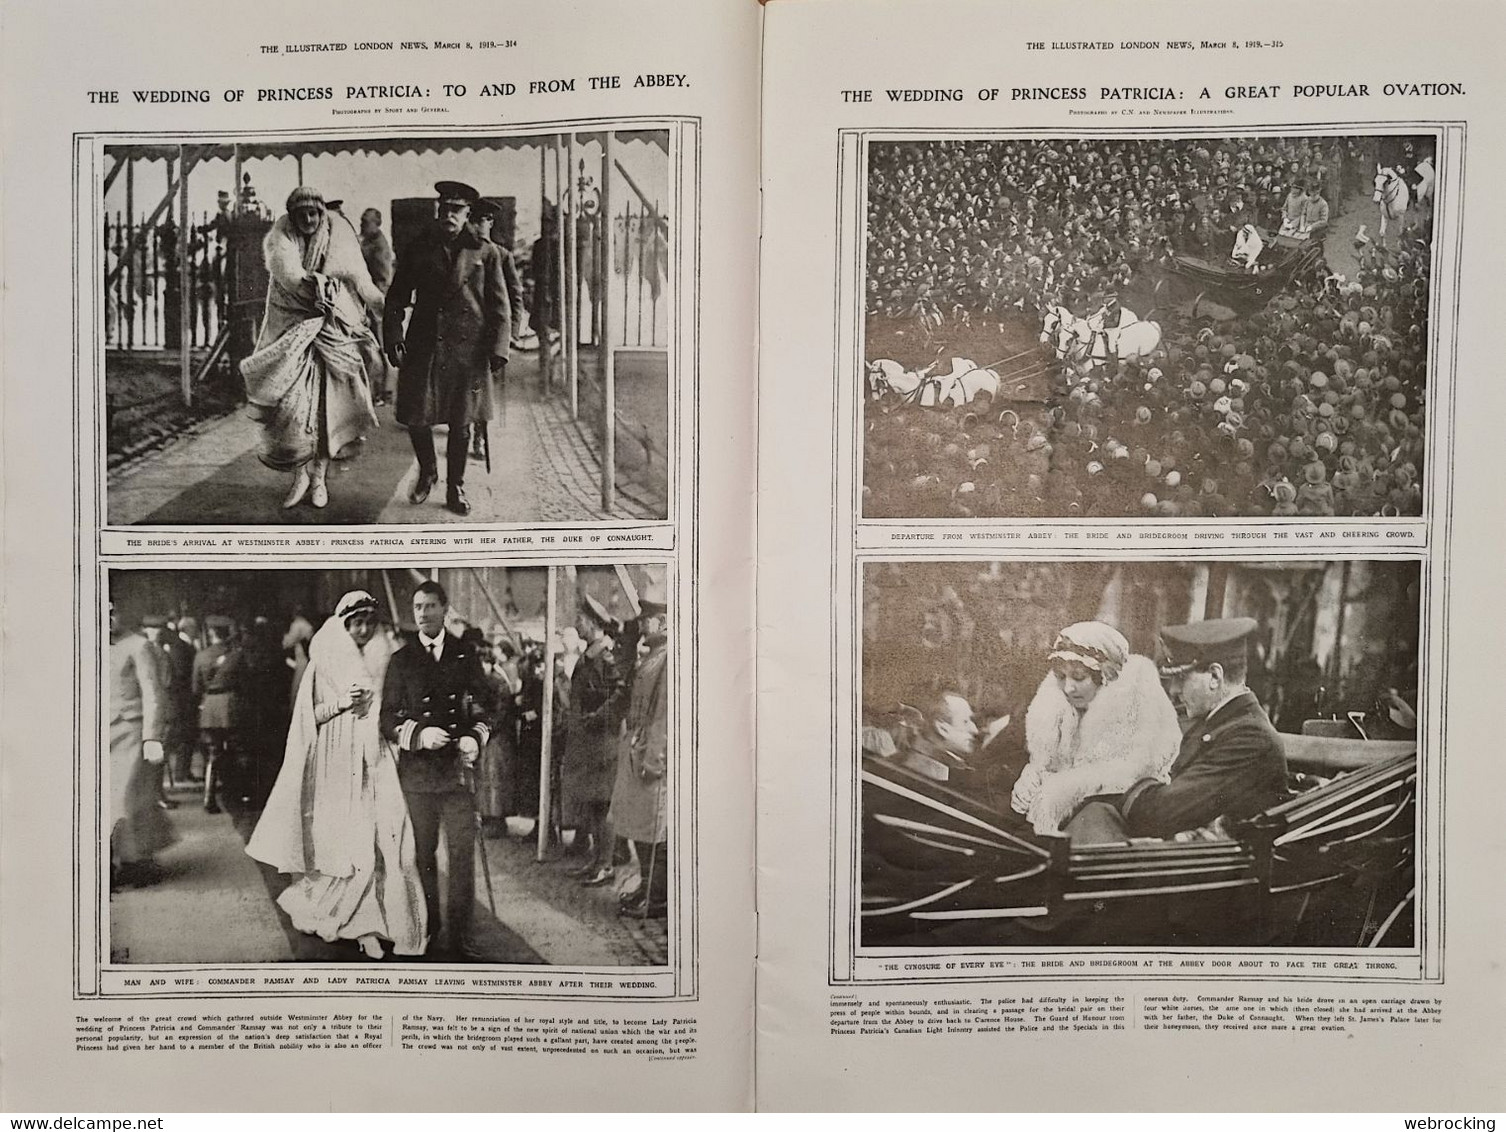 Complete Vintage Magazine - The Illustrated London News - March 8, 1919 - The Wedding Of Princess Patricia - Europe